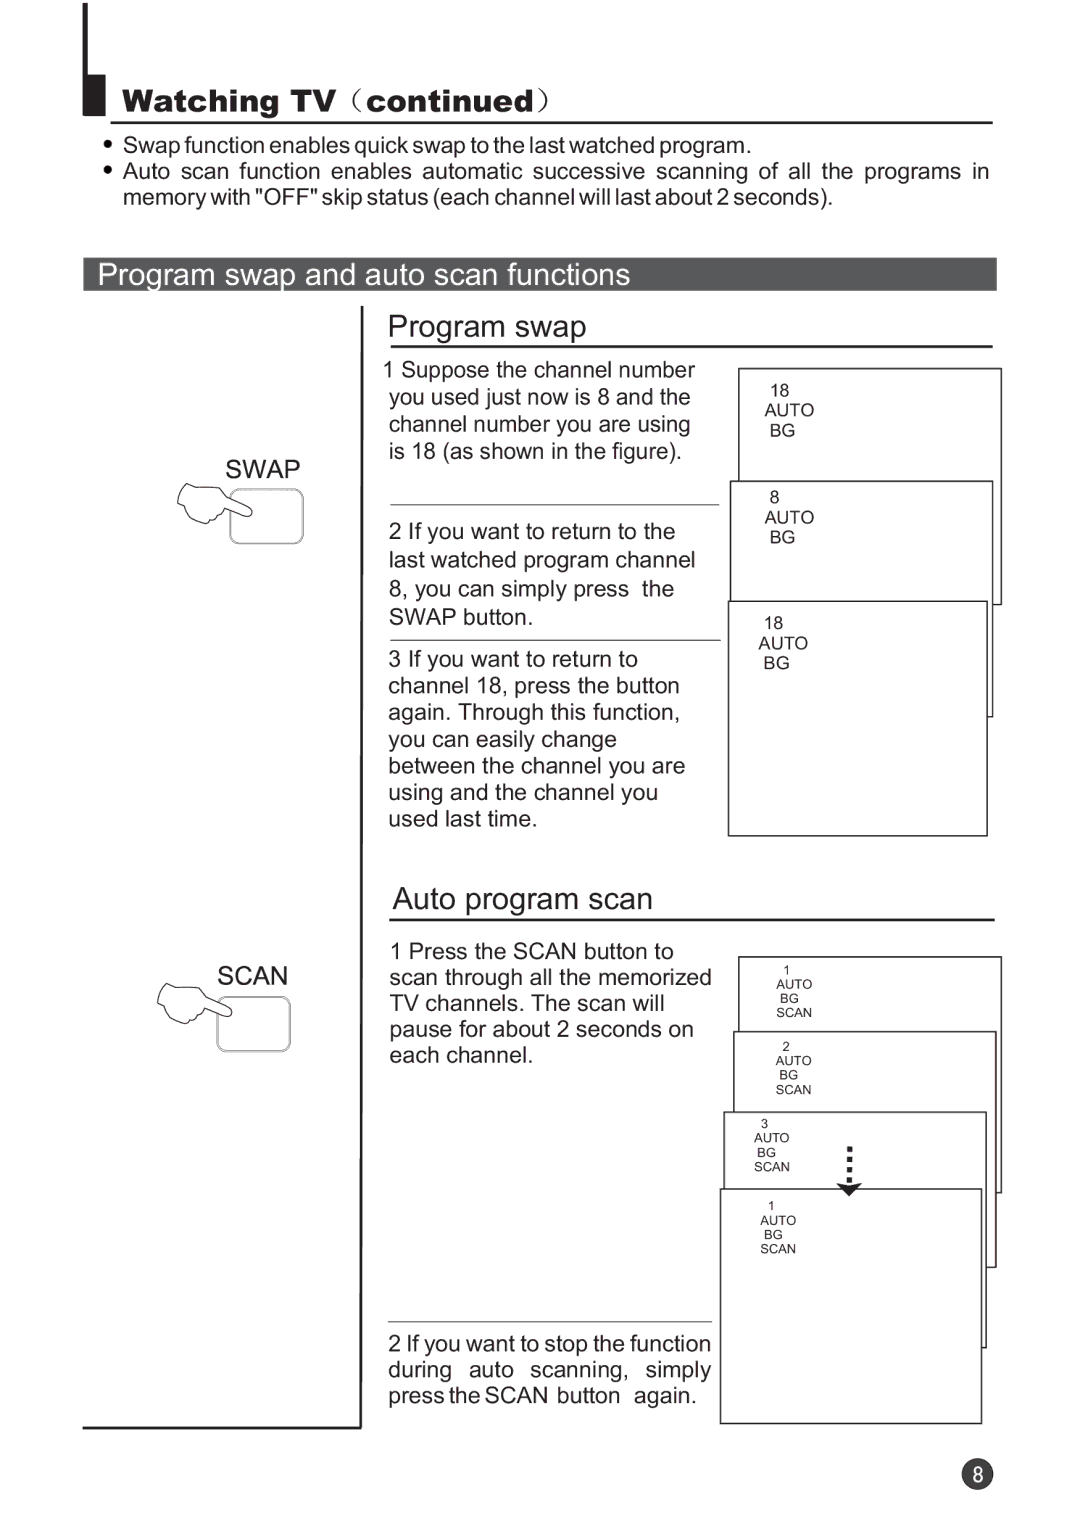 Audix TVD6040 owner manual Program swap and auto scan functions, Auto program scan 